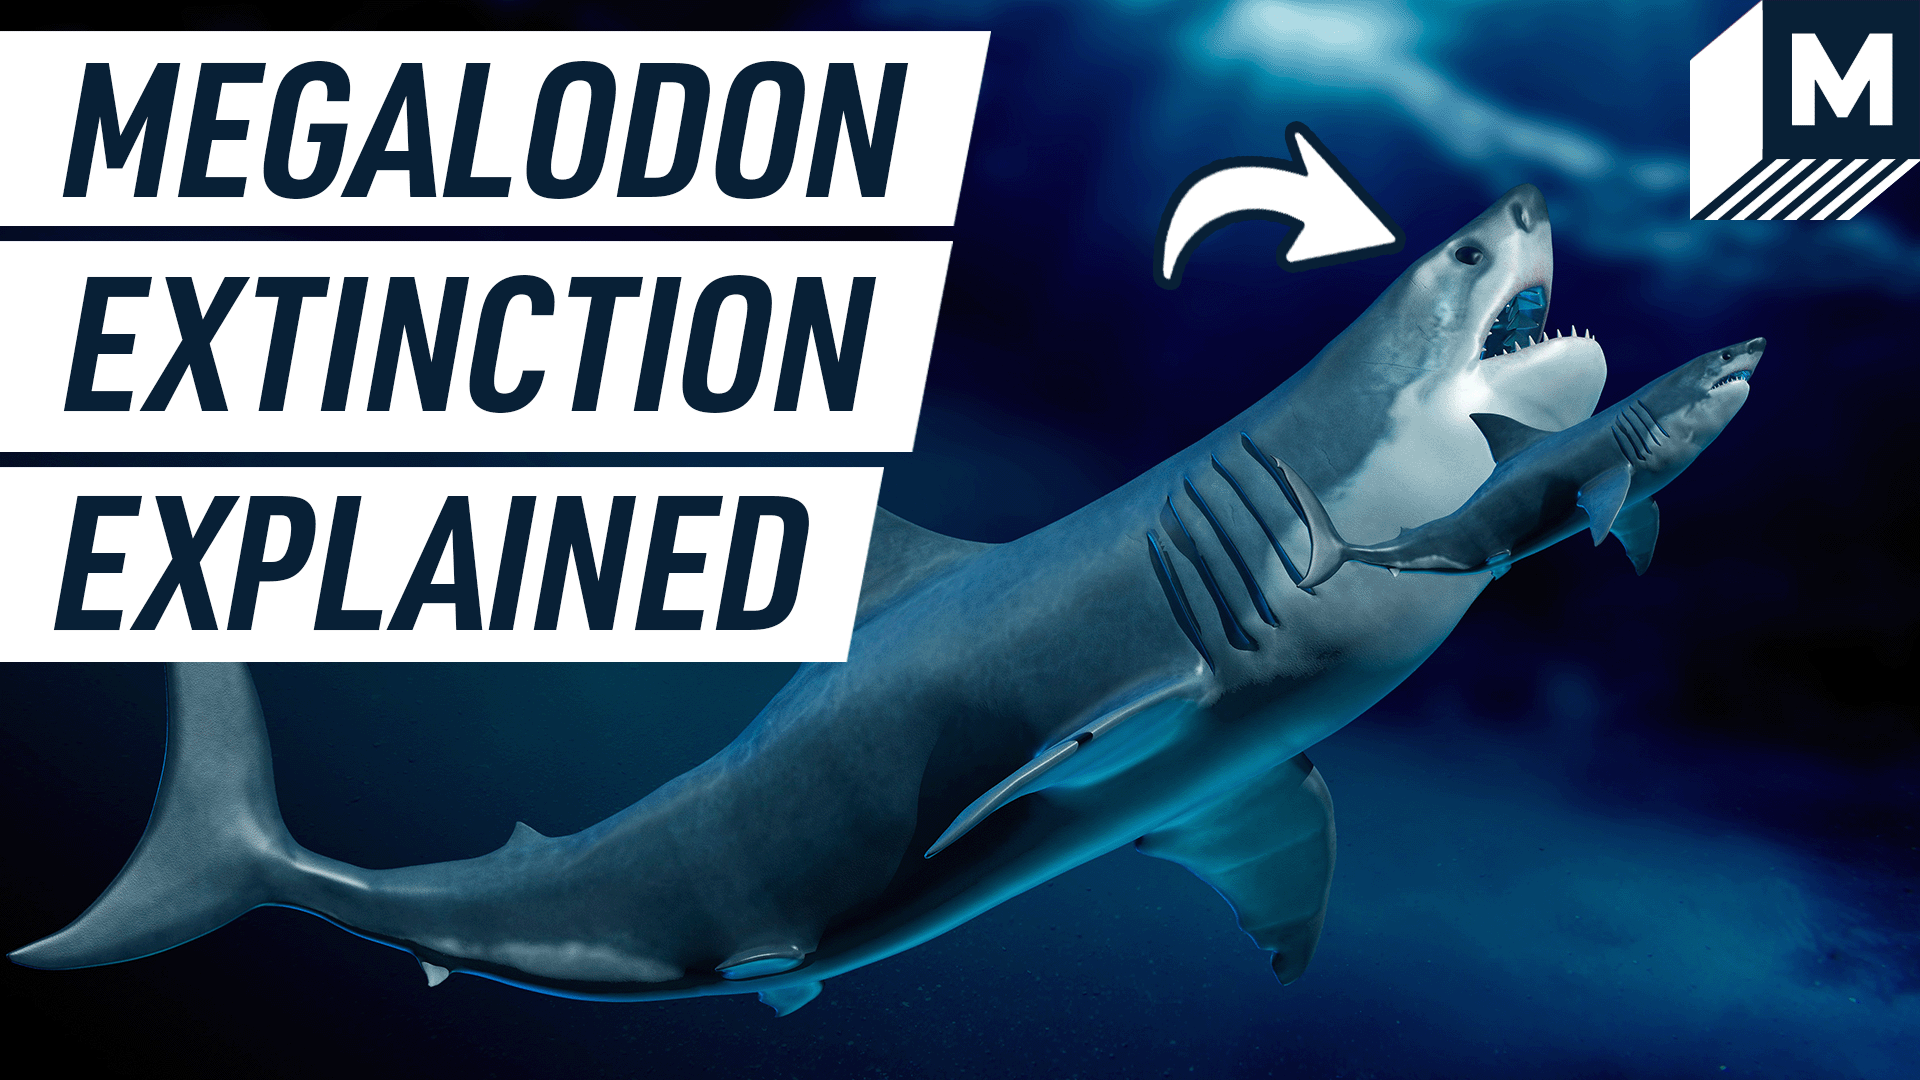 Megalodon Extinction Explained and an arrow pointing to a Megalodon swimming next to a great white shark